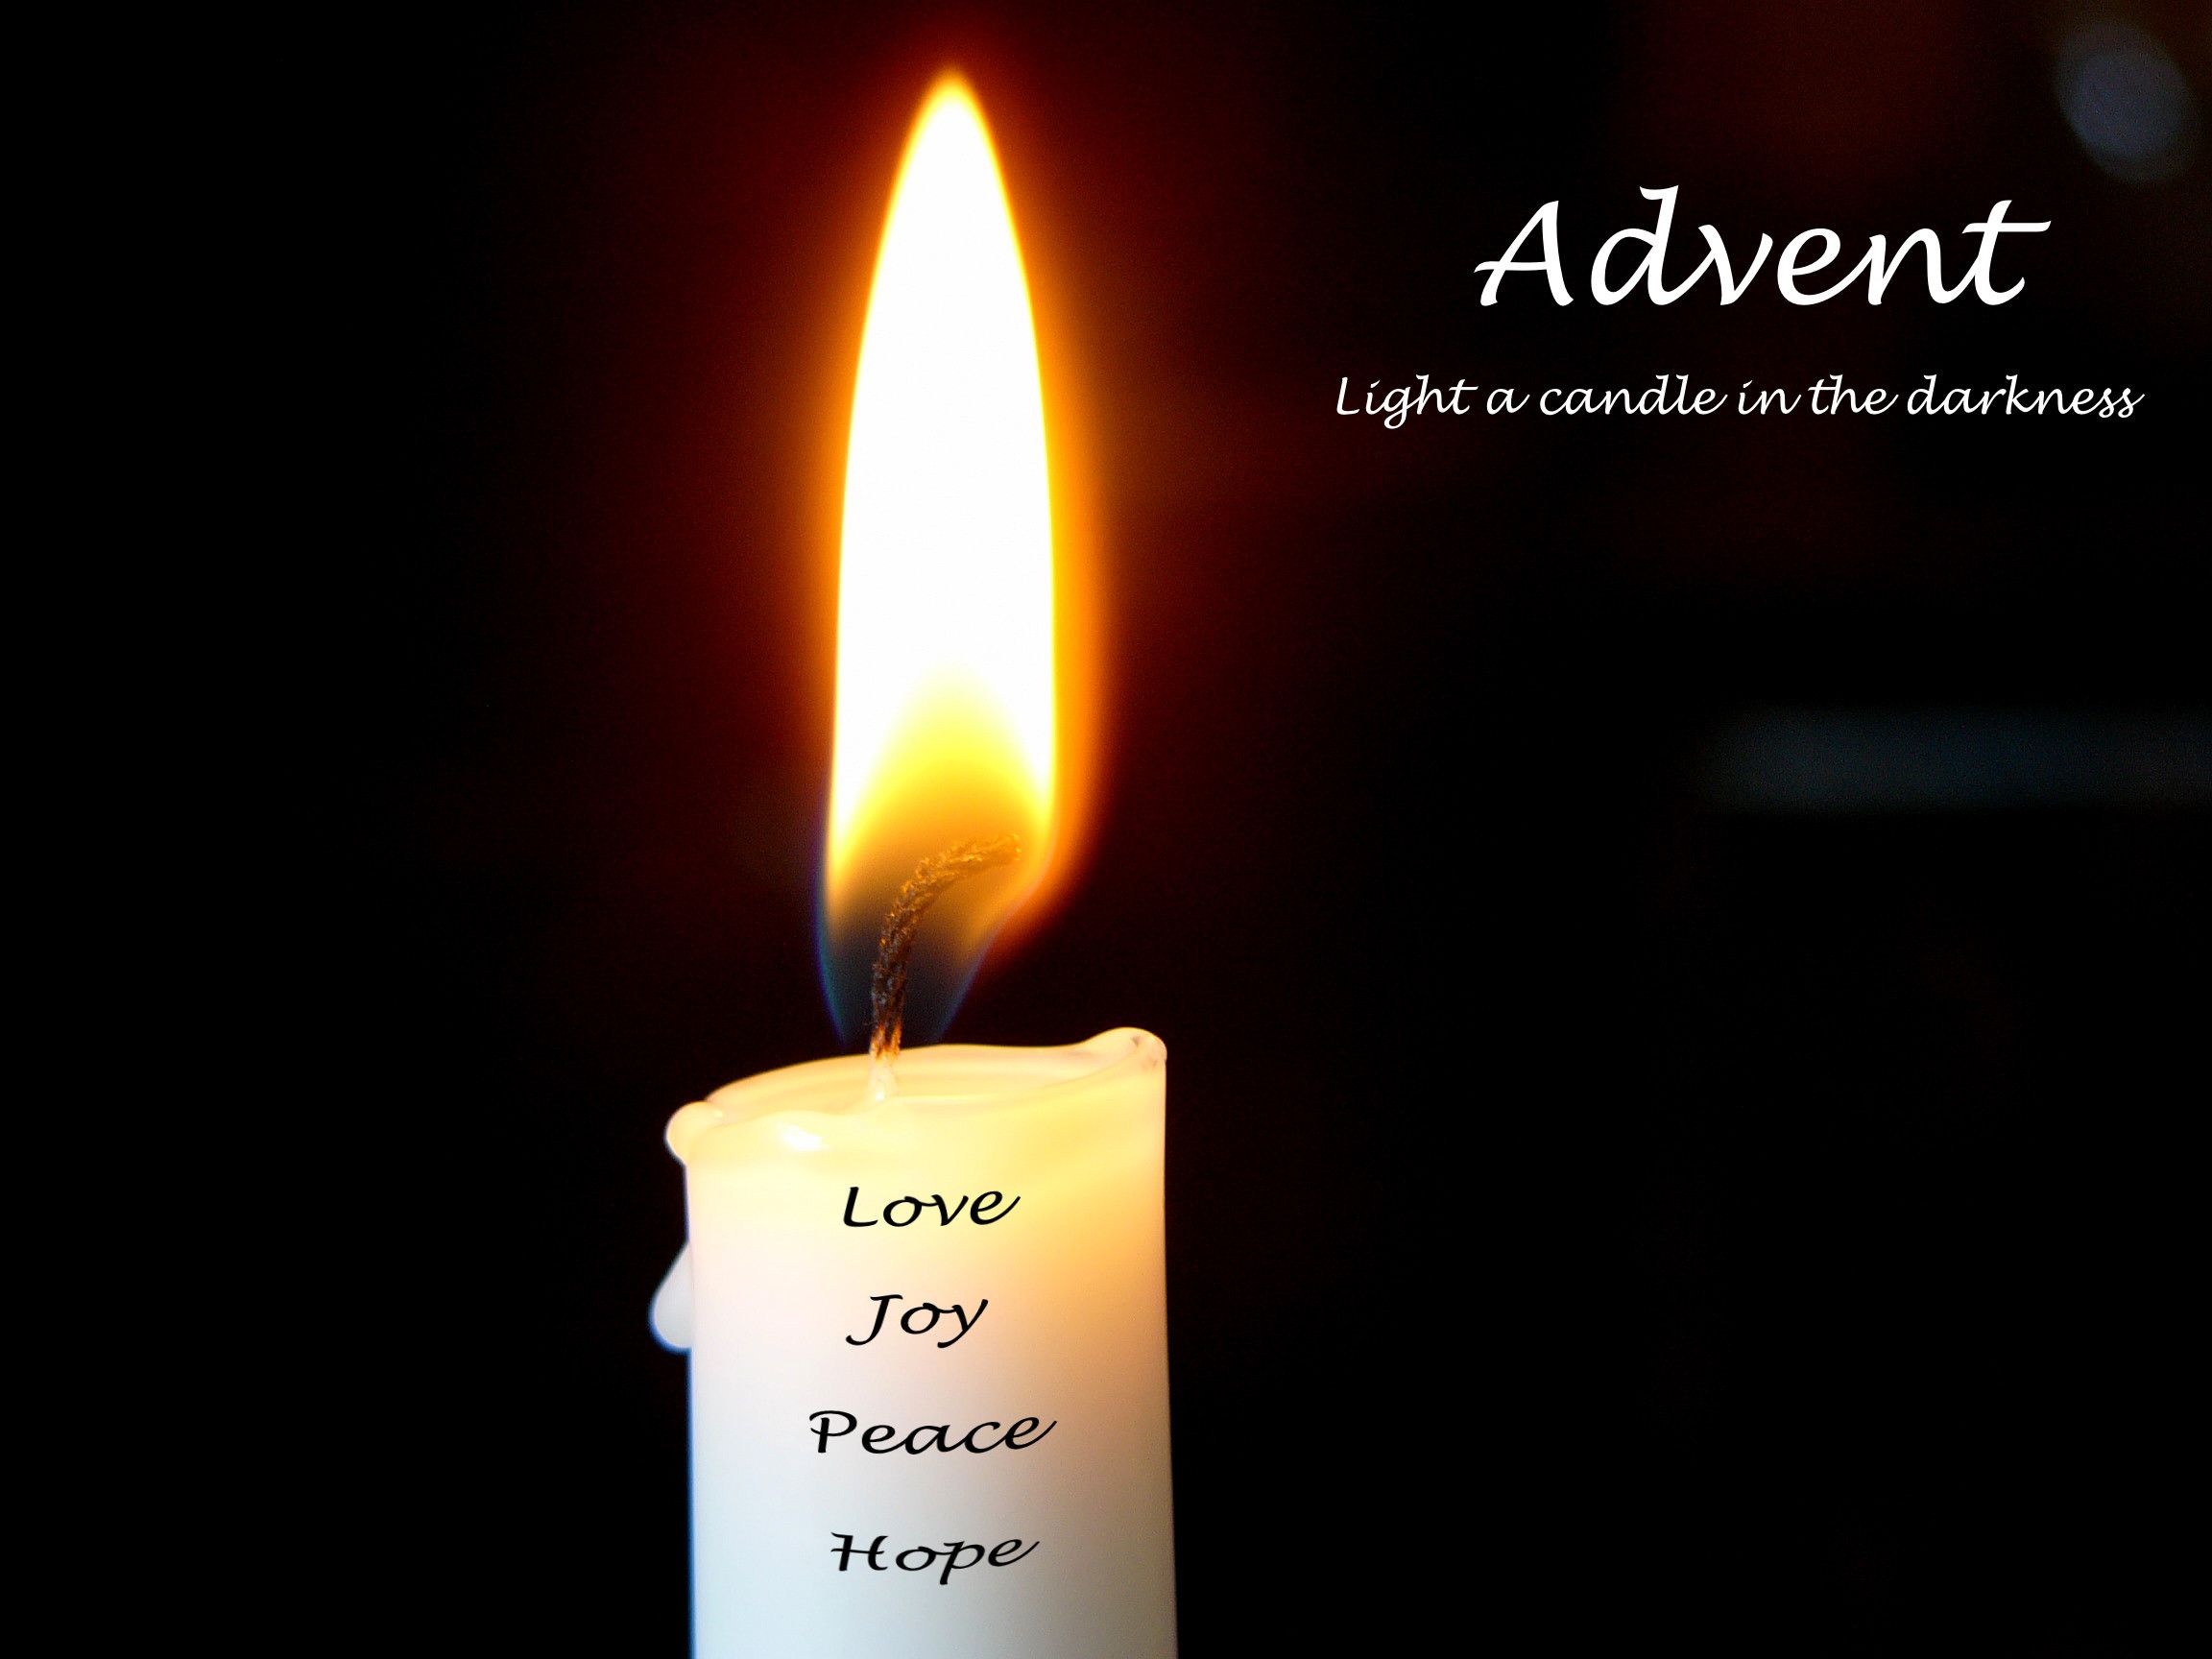 Advent Wallpaper & Background Beautiful Best Available For Download Advent Photo Free On Zicxa.com Image